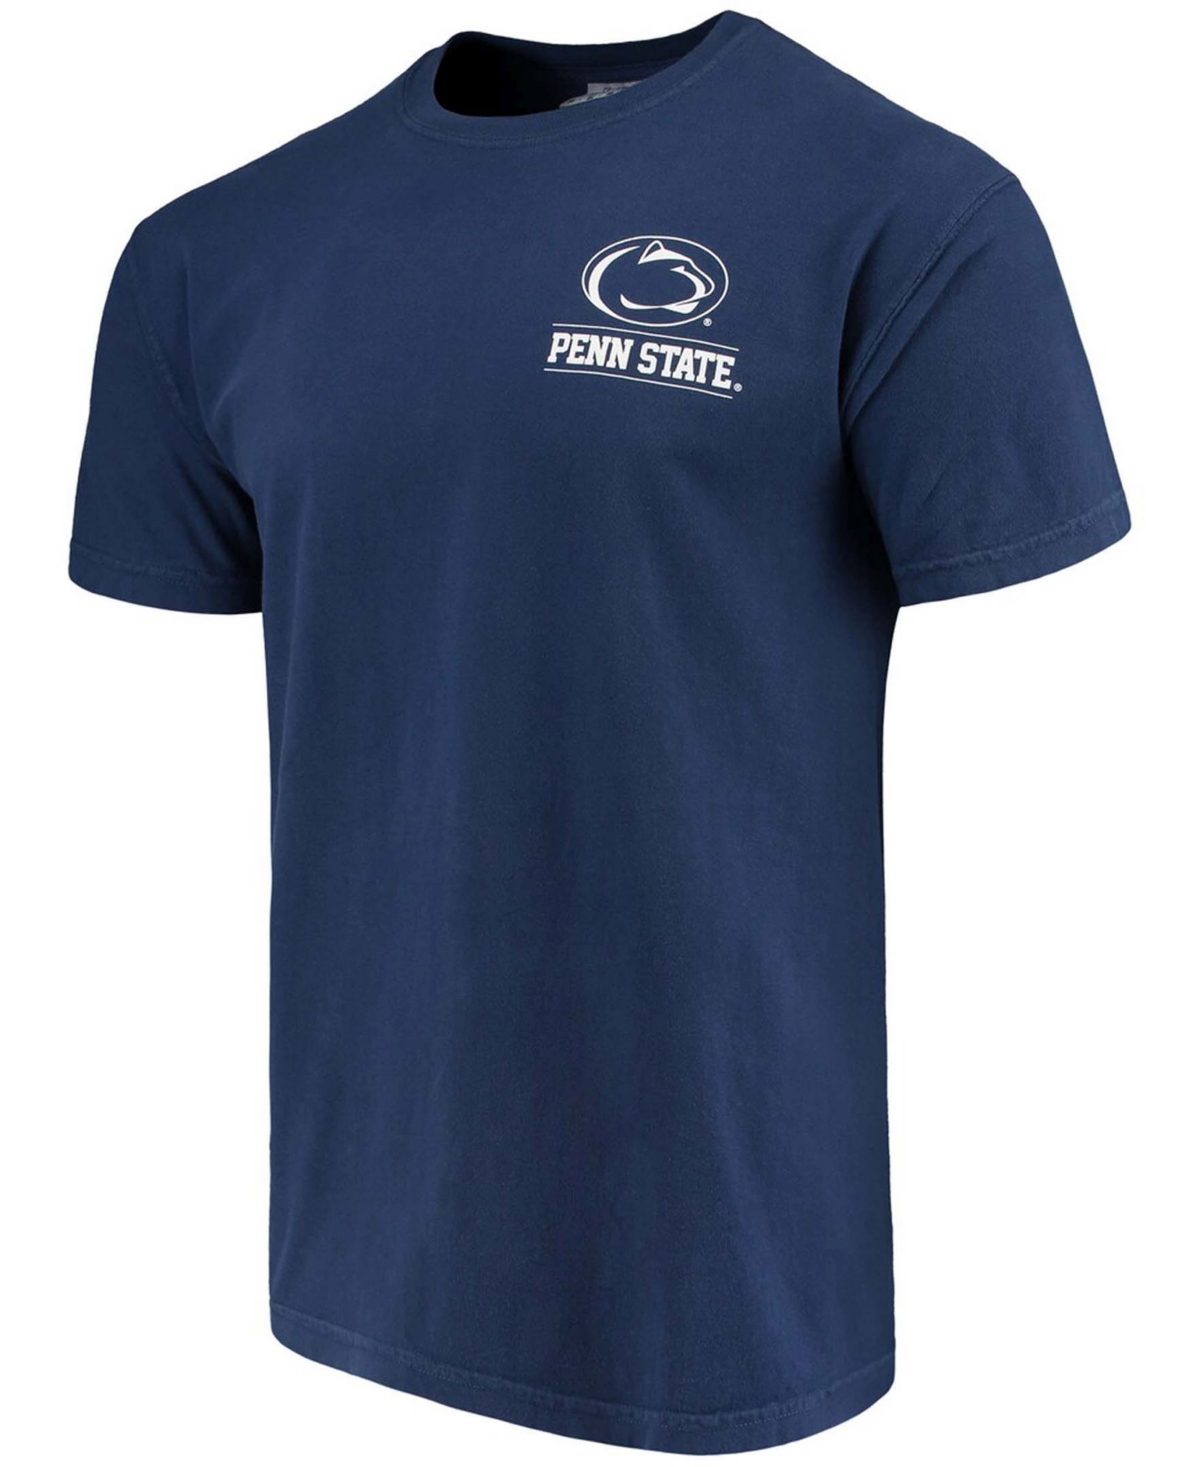 Men's Navy Penn State Nittany Lions Comfort Colors Campus Icon T-shirt - Navy